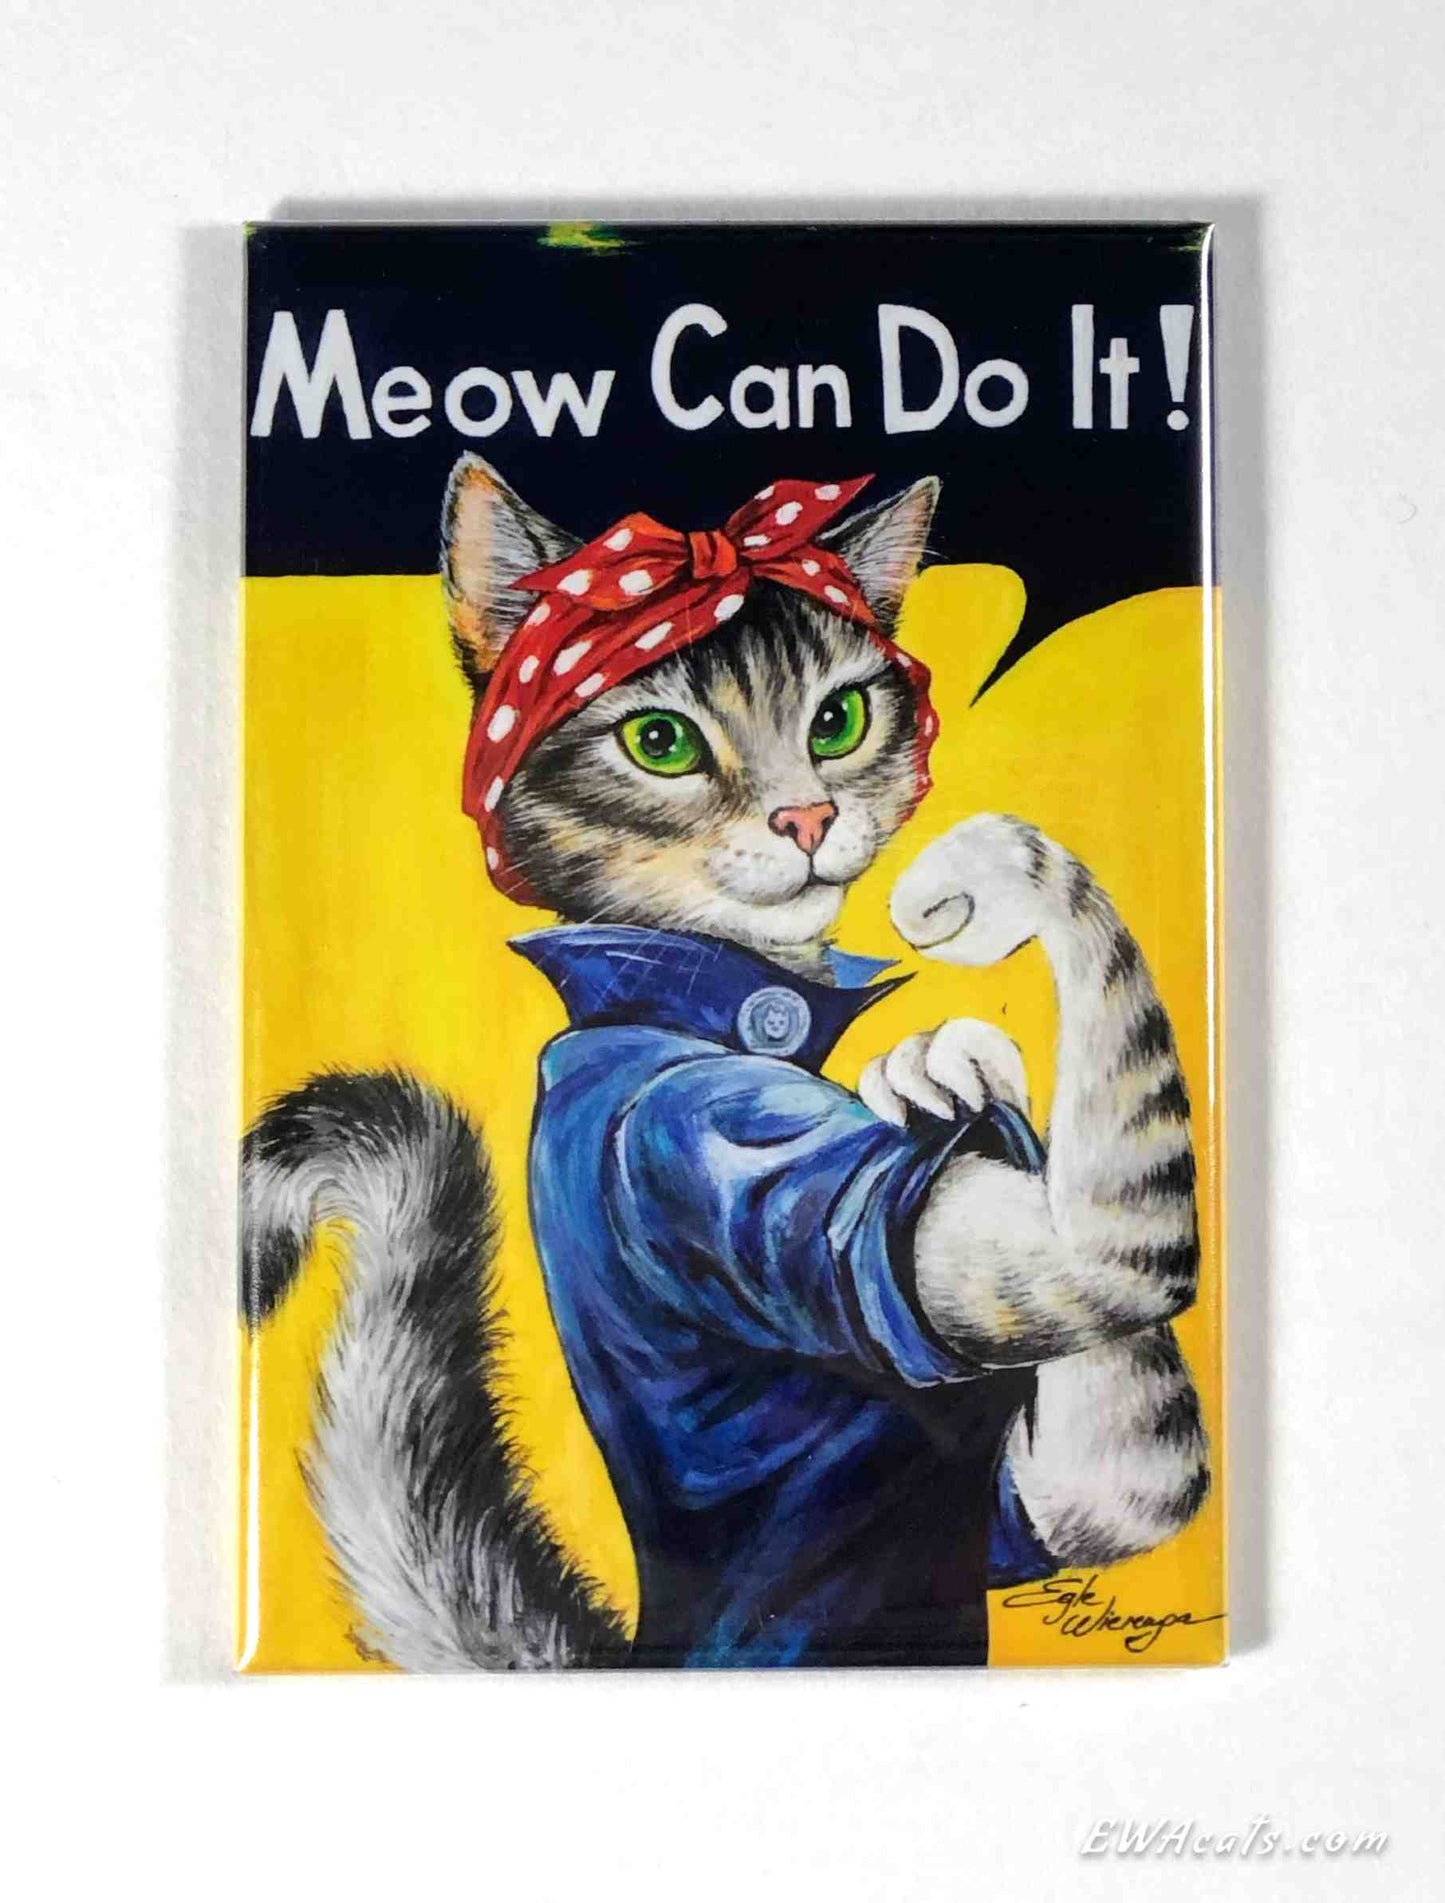 MAGNET 2"x 3" Rectangle "Meow Can Do It!"